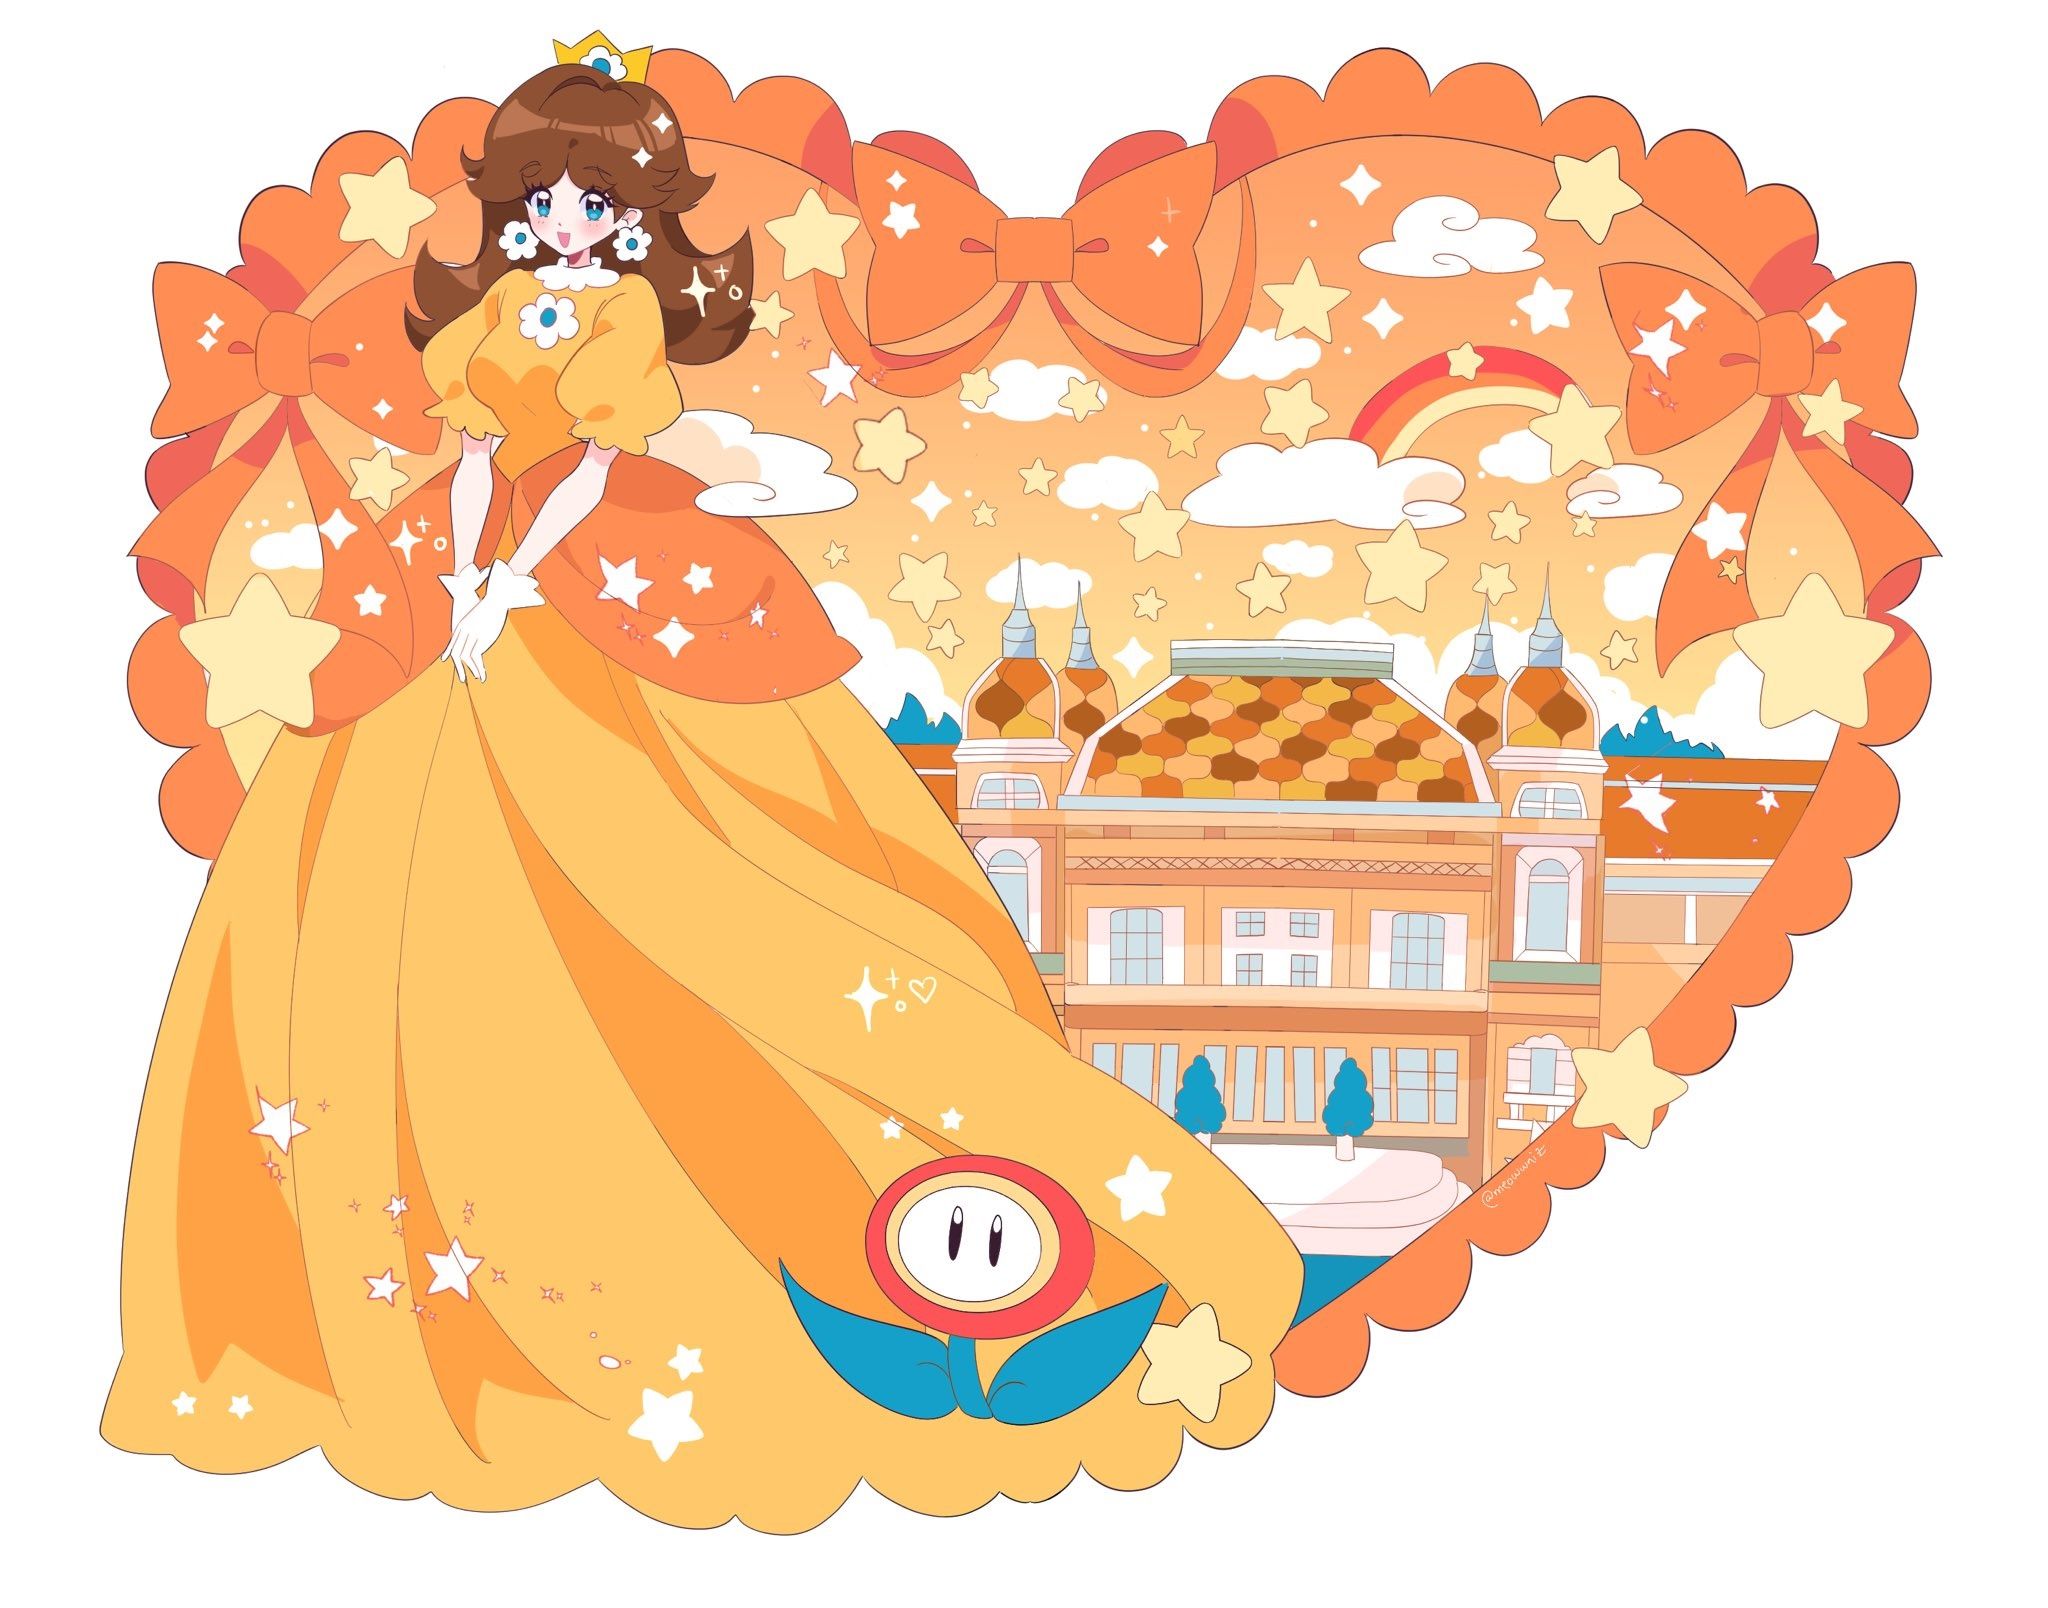 A princess in a ballgown stands in front of a heart-shaped castle. - Super Mario